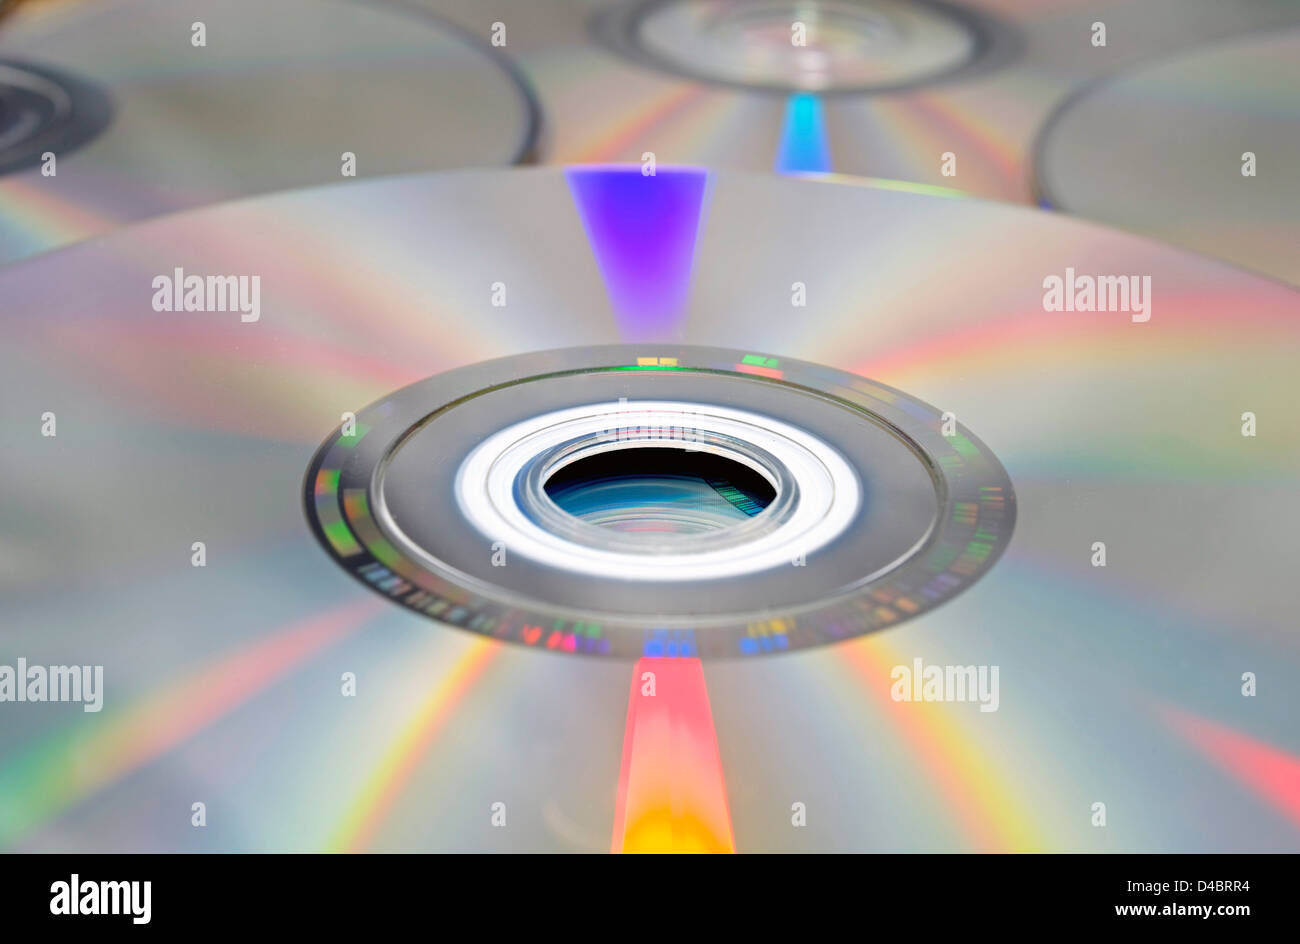 Compact Disc Texture. DVD and CD background. Stock Photo